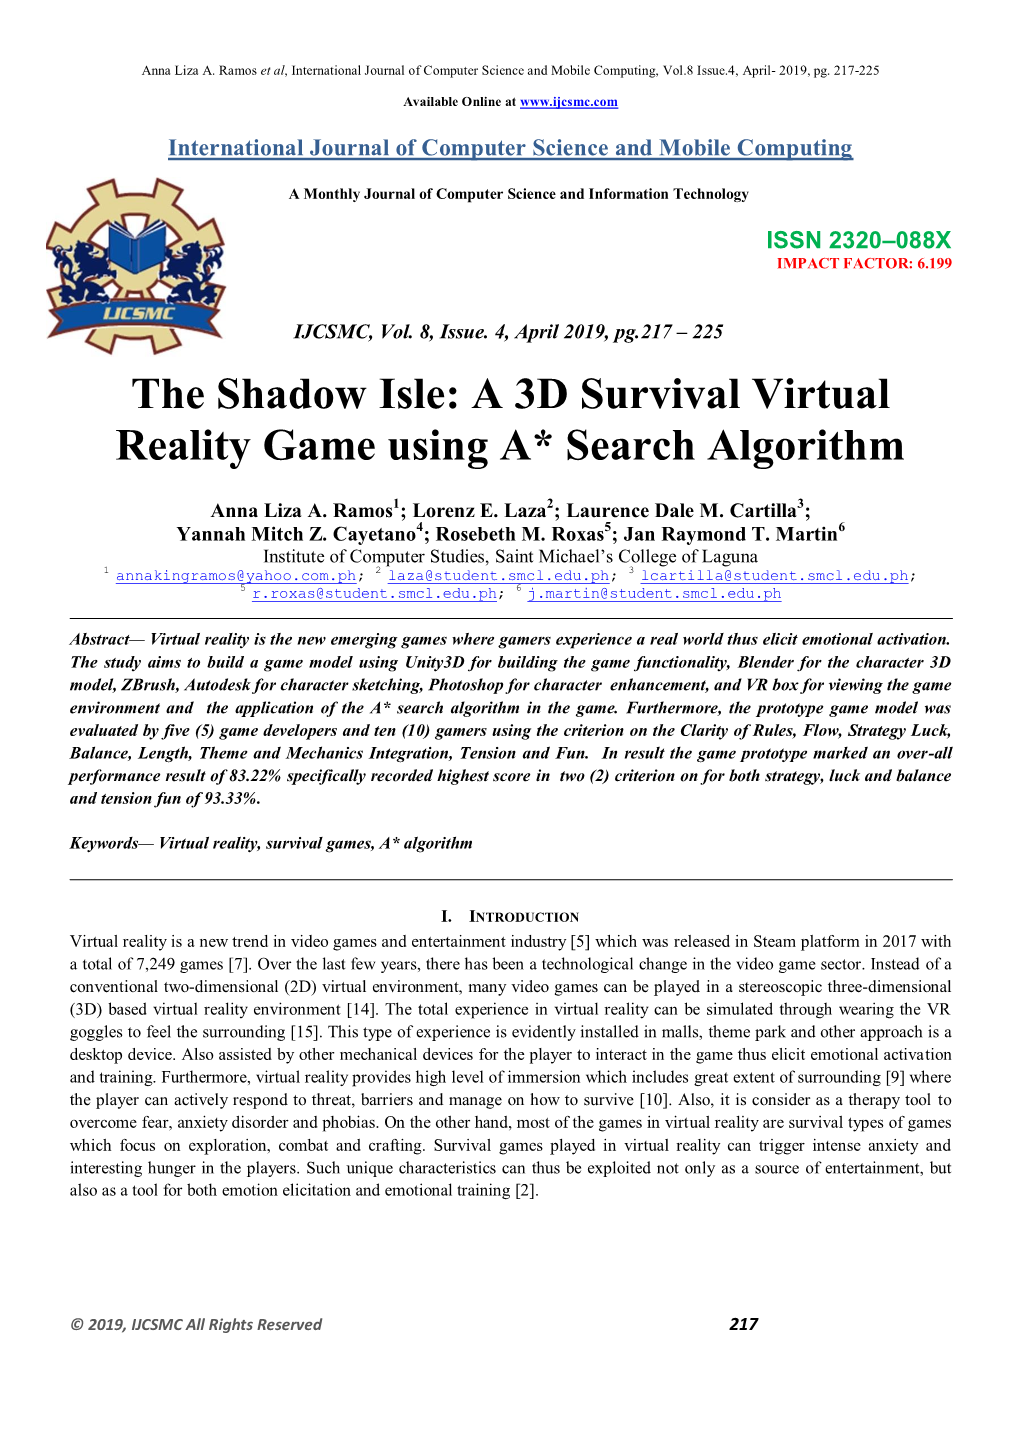 The Shadow Isle: a 3D Survival Virtual Reality Game Using A* Search Algorithm